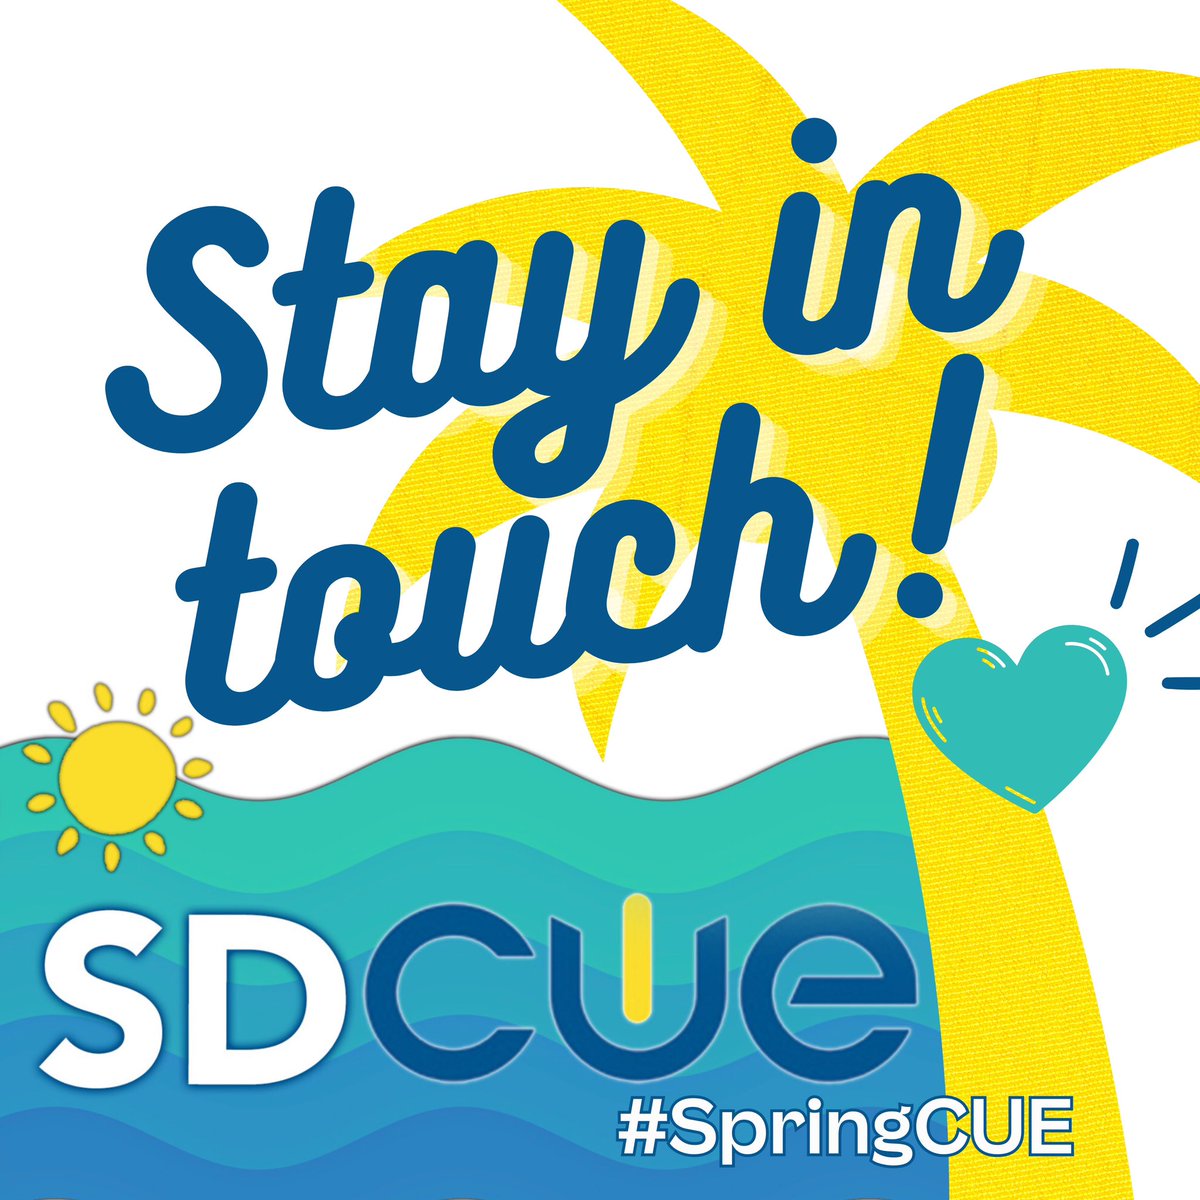 So great seeing and meeting everyone! Follow us & then comment below with your name so we can all follow each other and keep the energy and connection going! Like, Follow, Comment & Share for a chance to win some SDCUE swag! @sandiego_cue #SpringCUE #SDCUE #CUEmmunity